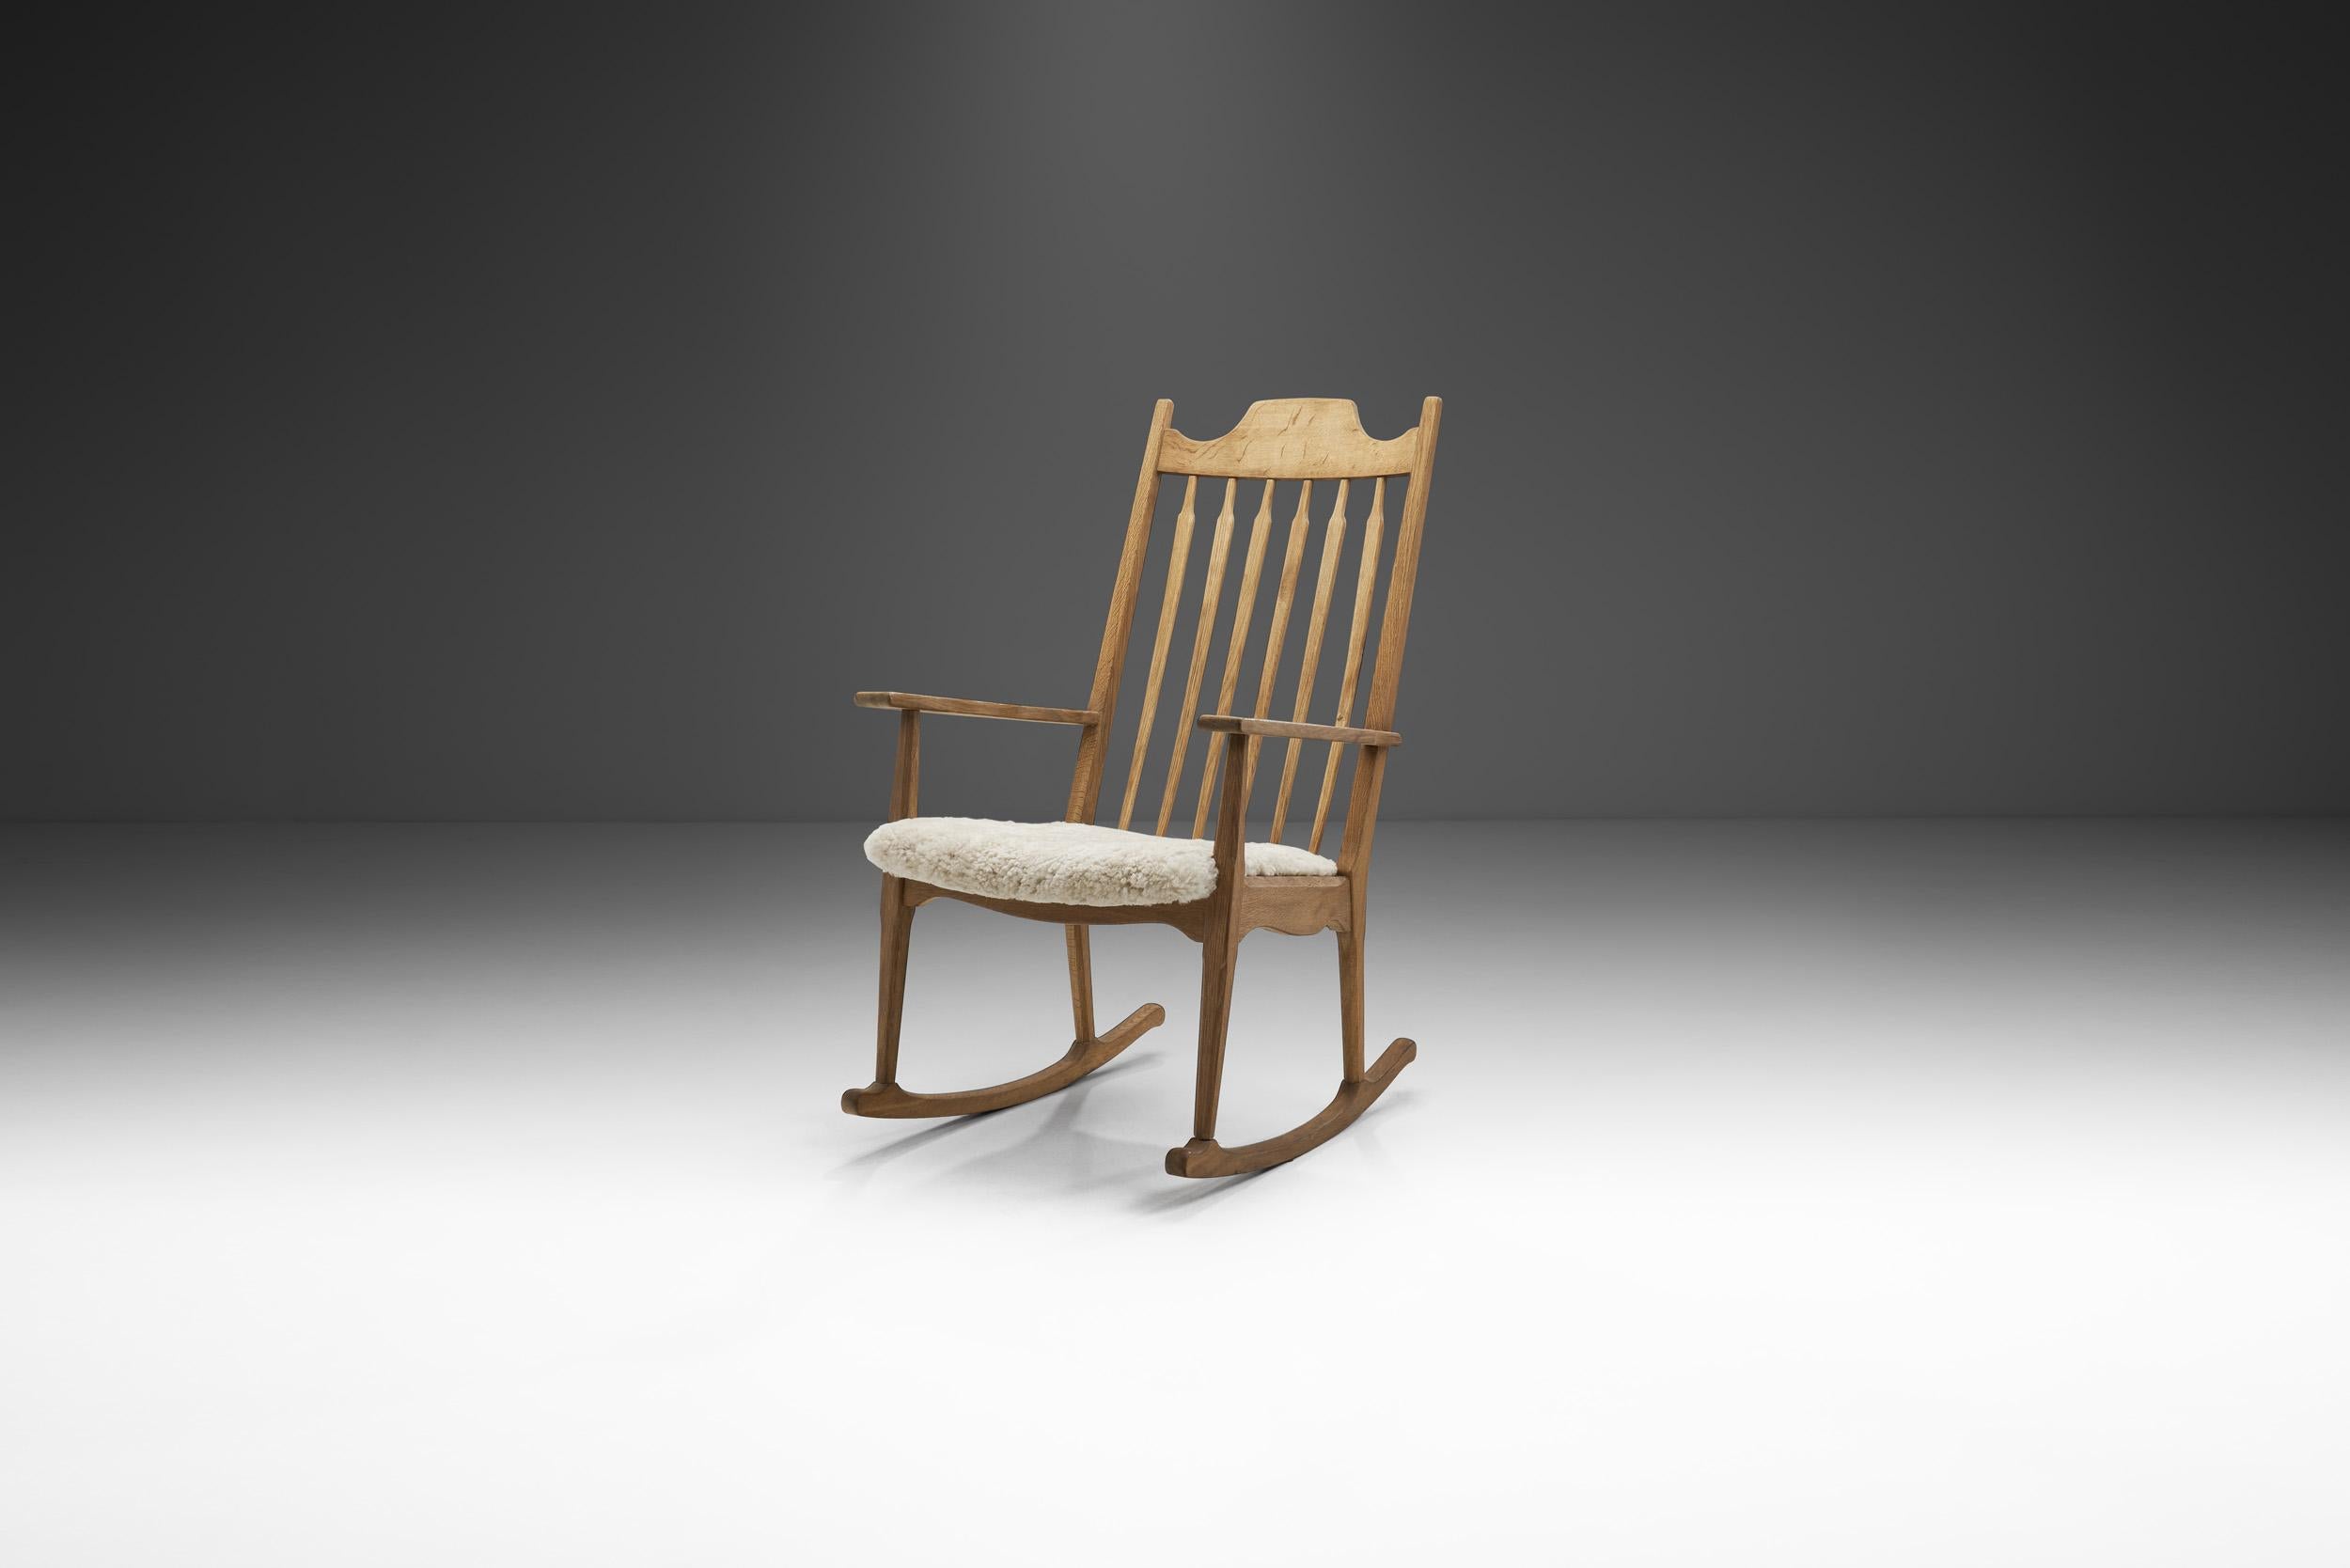 While they play a prominent role in both architecture and pop culture, rocking chairs solidified their place in Scandinavian design history as well. As this Henning Kjærnulf model proves, functionality can manifest in many forms, but it is always